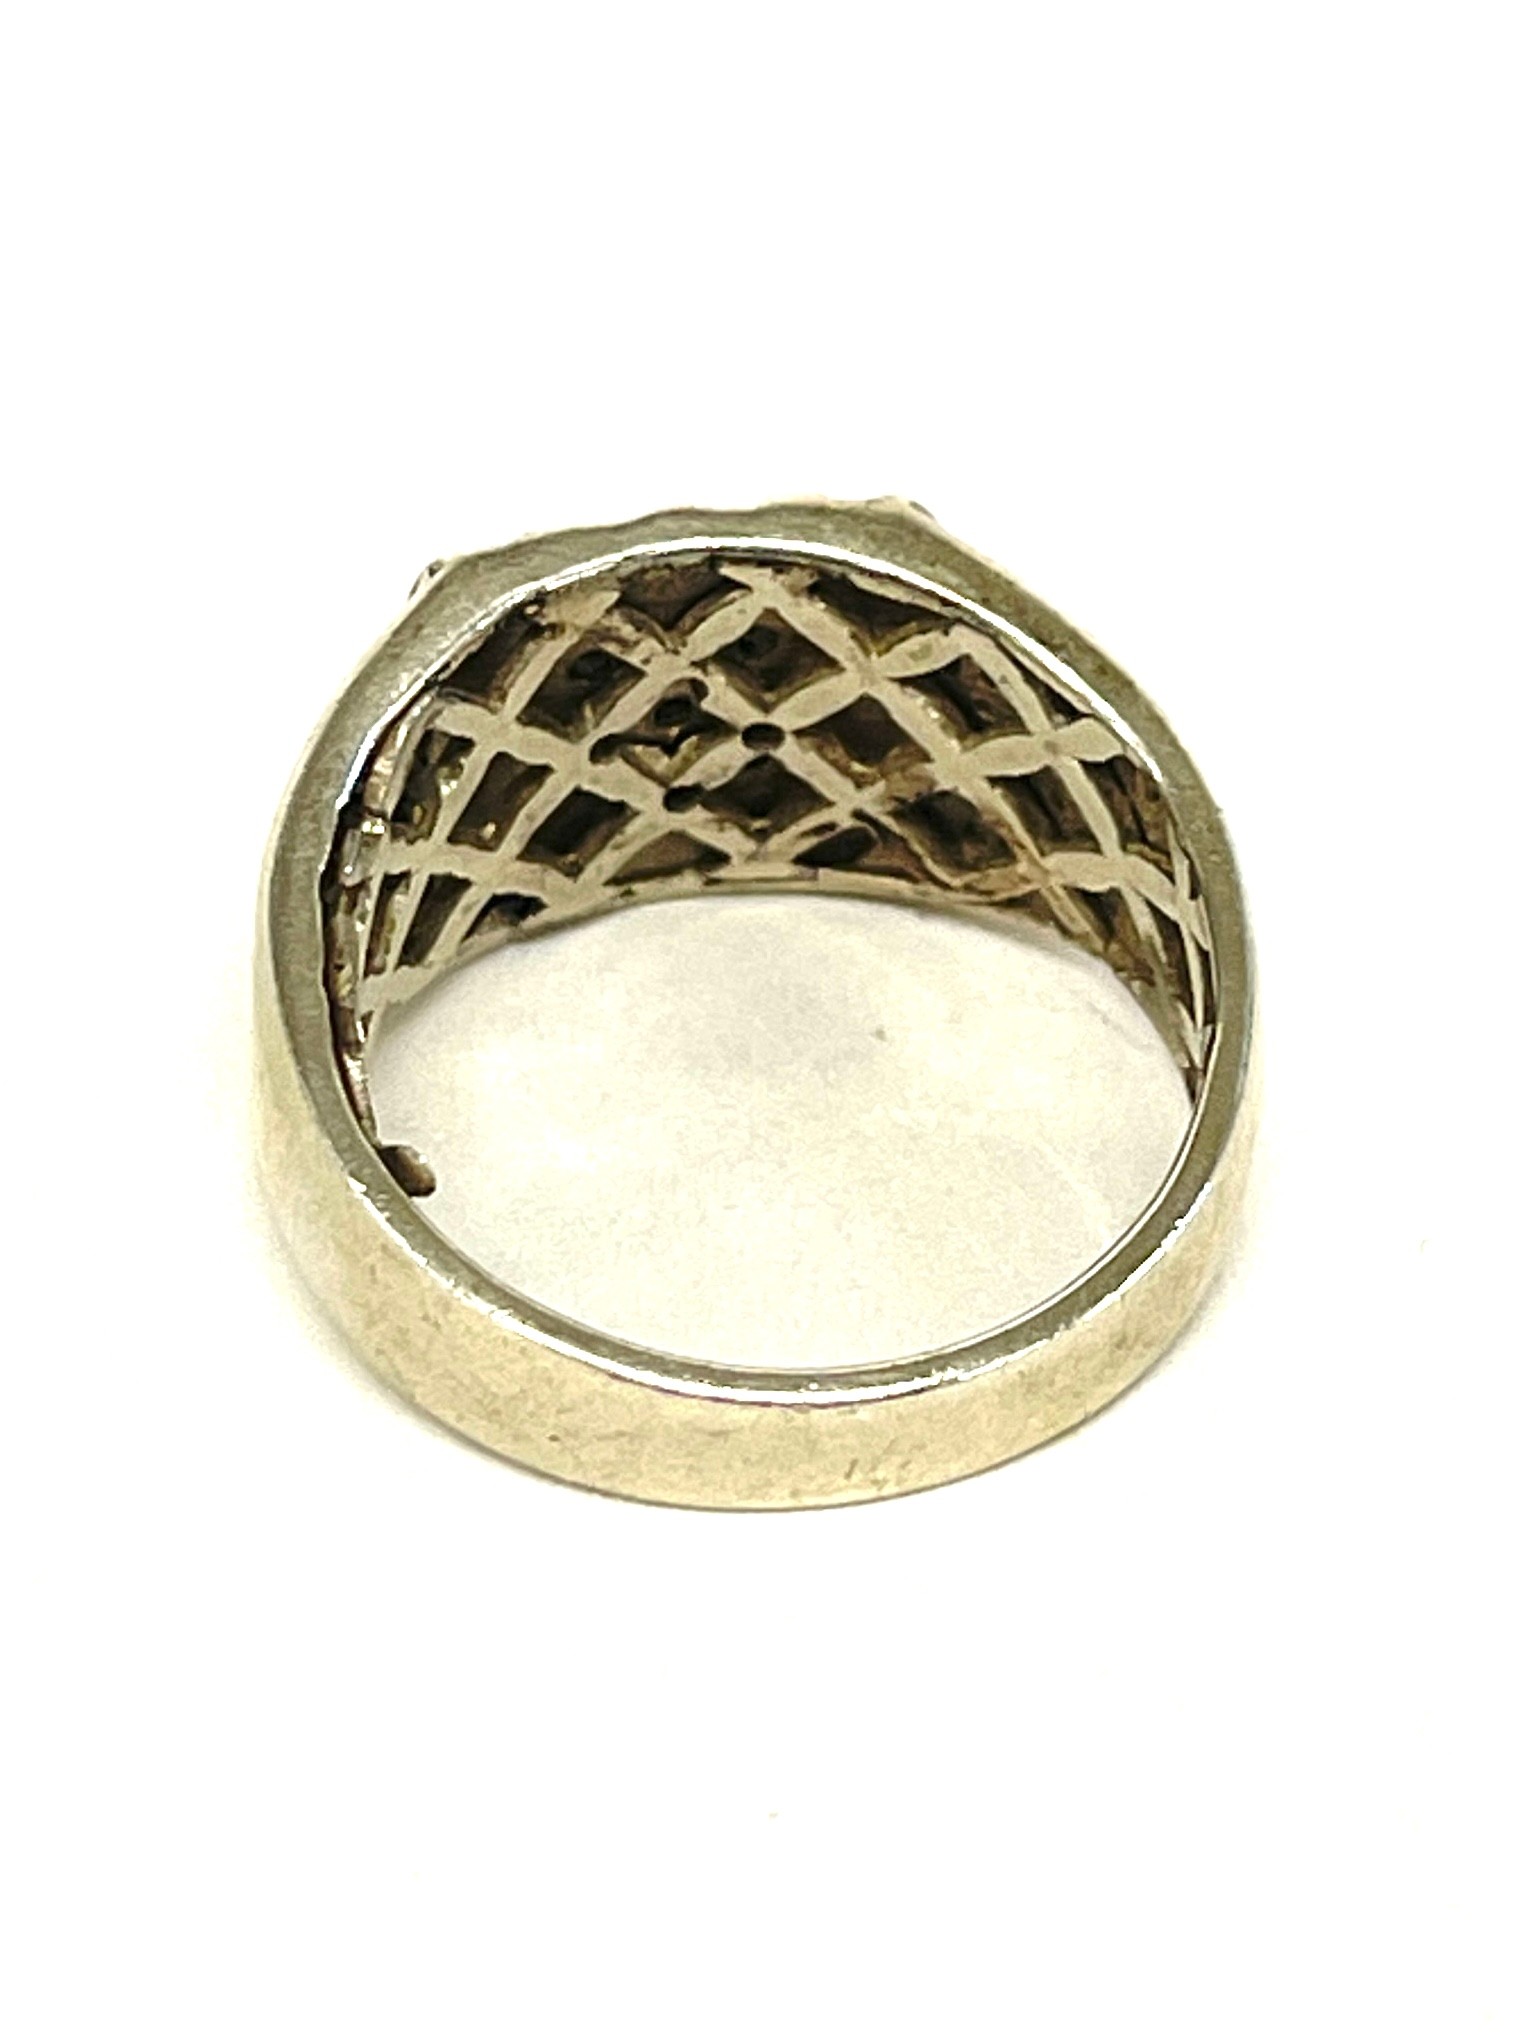 Gents large Silver hallmarked stone ring - Image 3 of 4